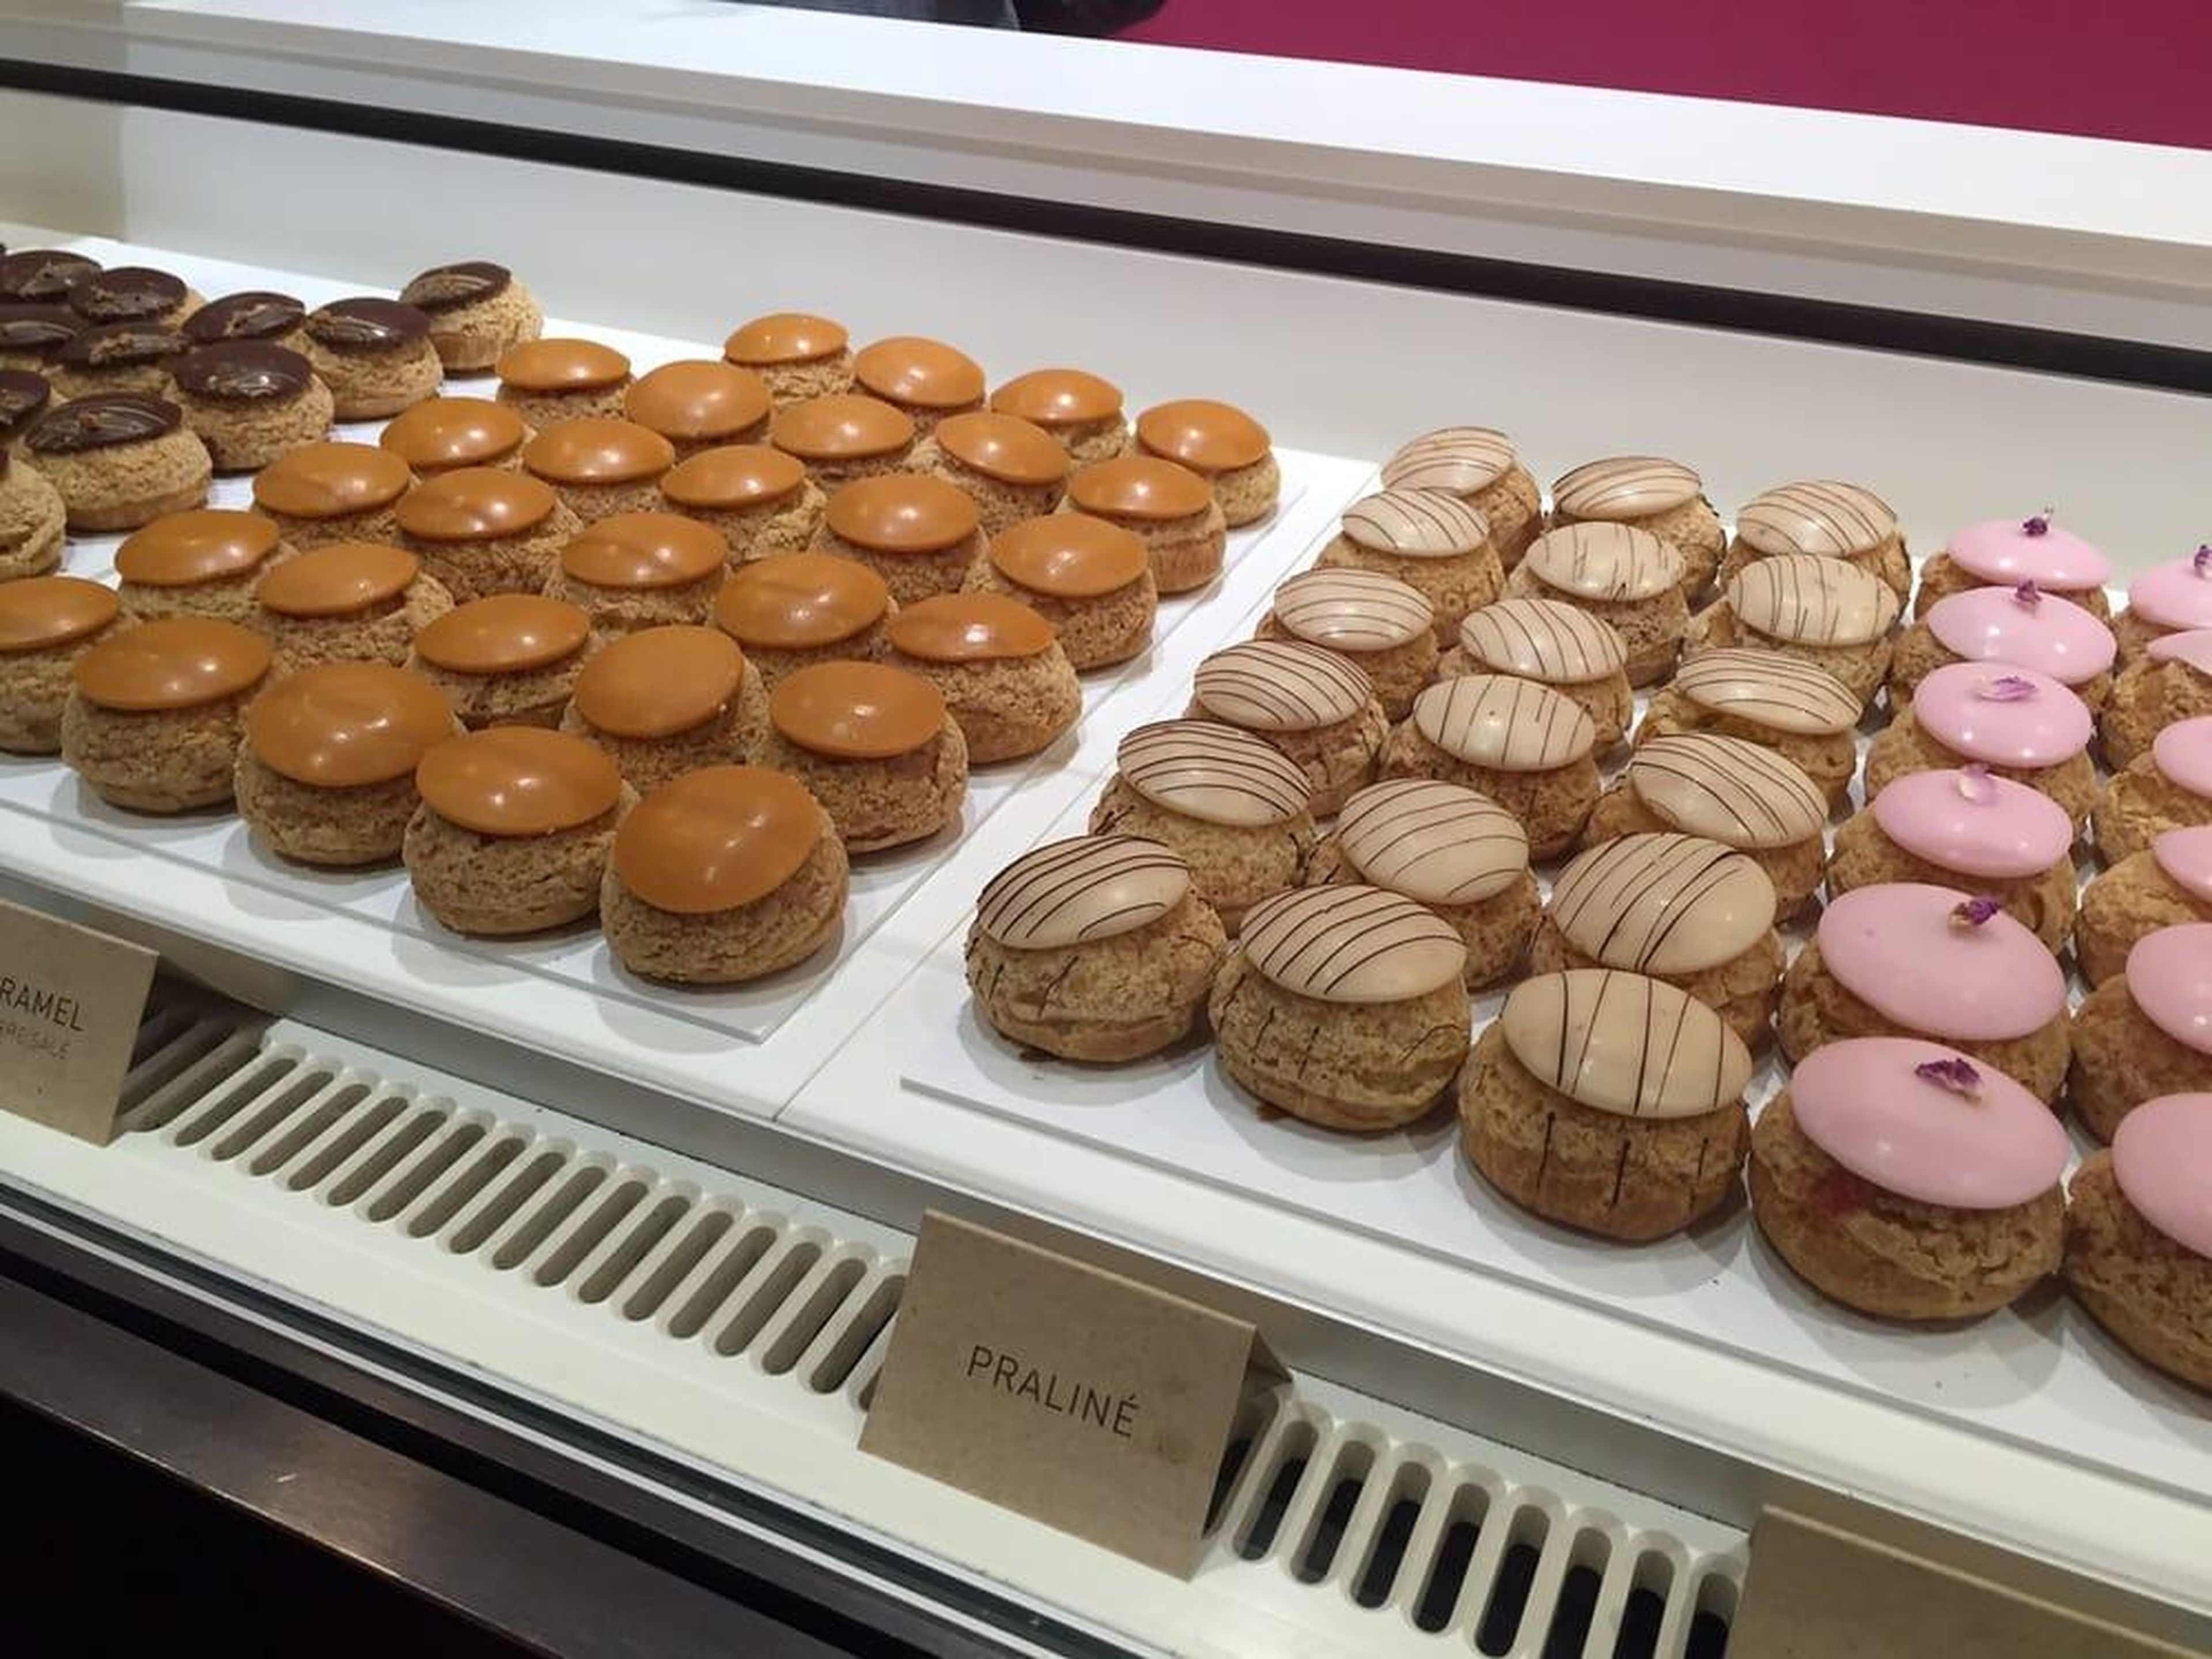 You can find them at Popelini — a pâtisserie that serves cream puffs exclusively.